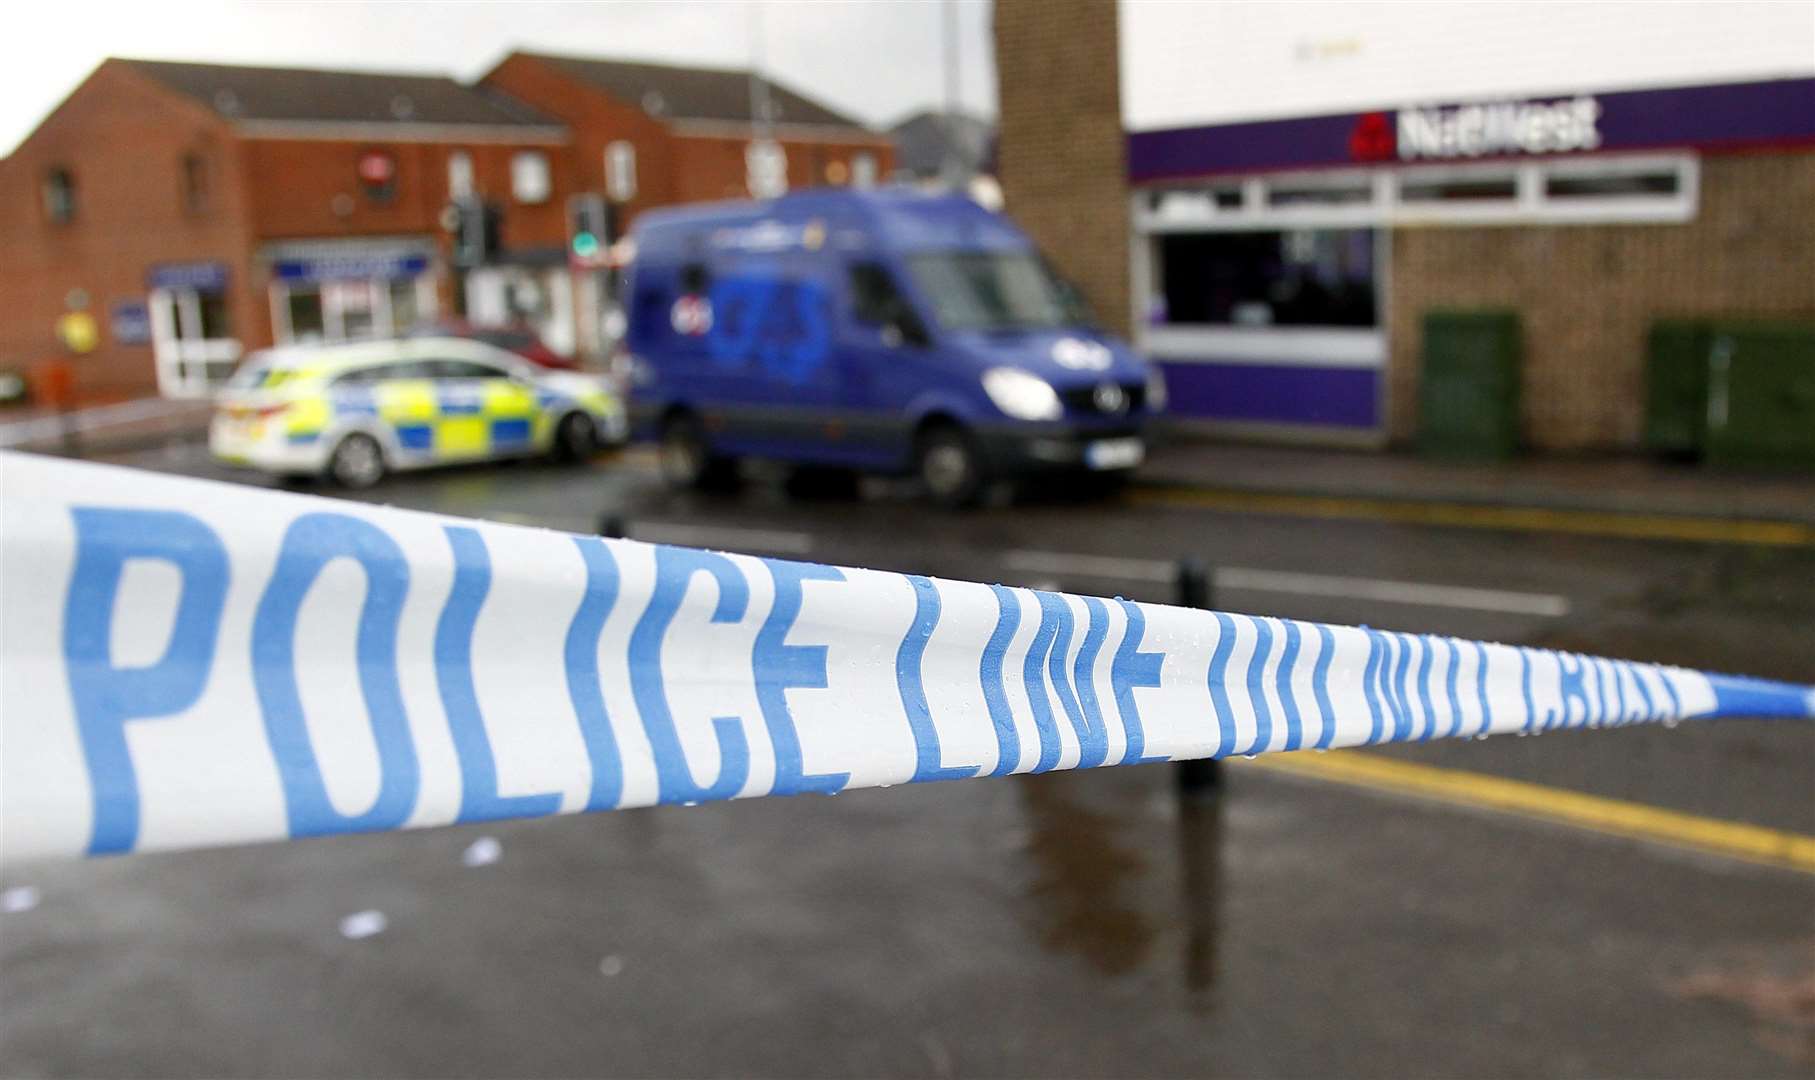 Police at the scene of the robbery in September. Picture: Sean Aidan